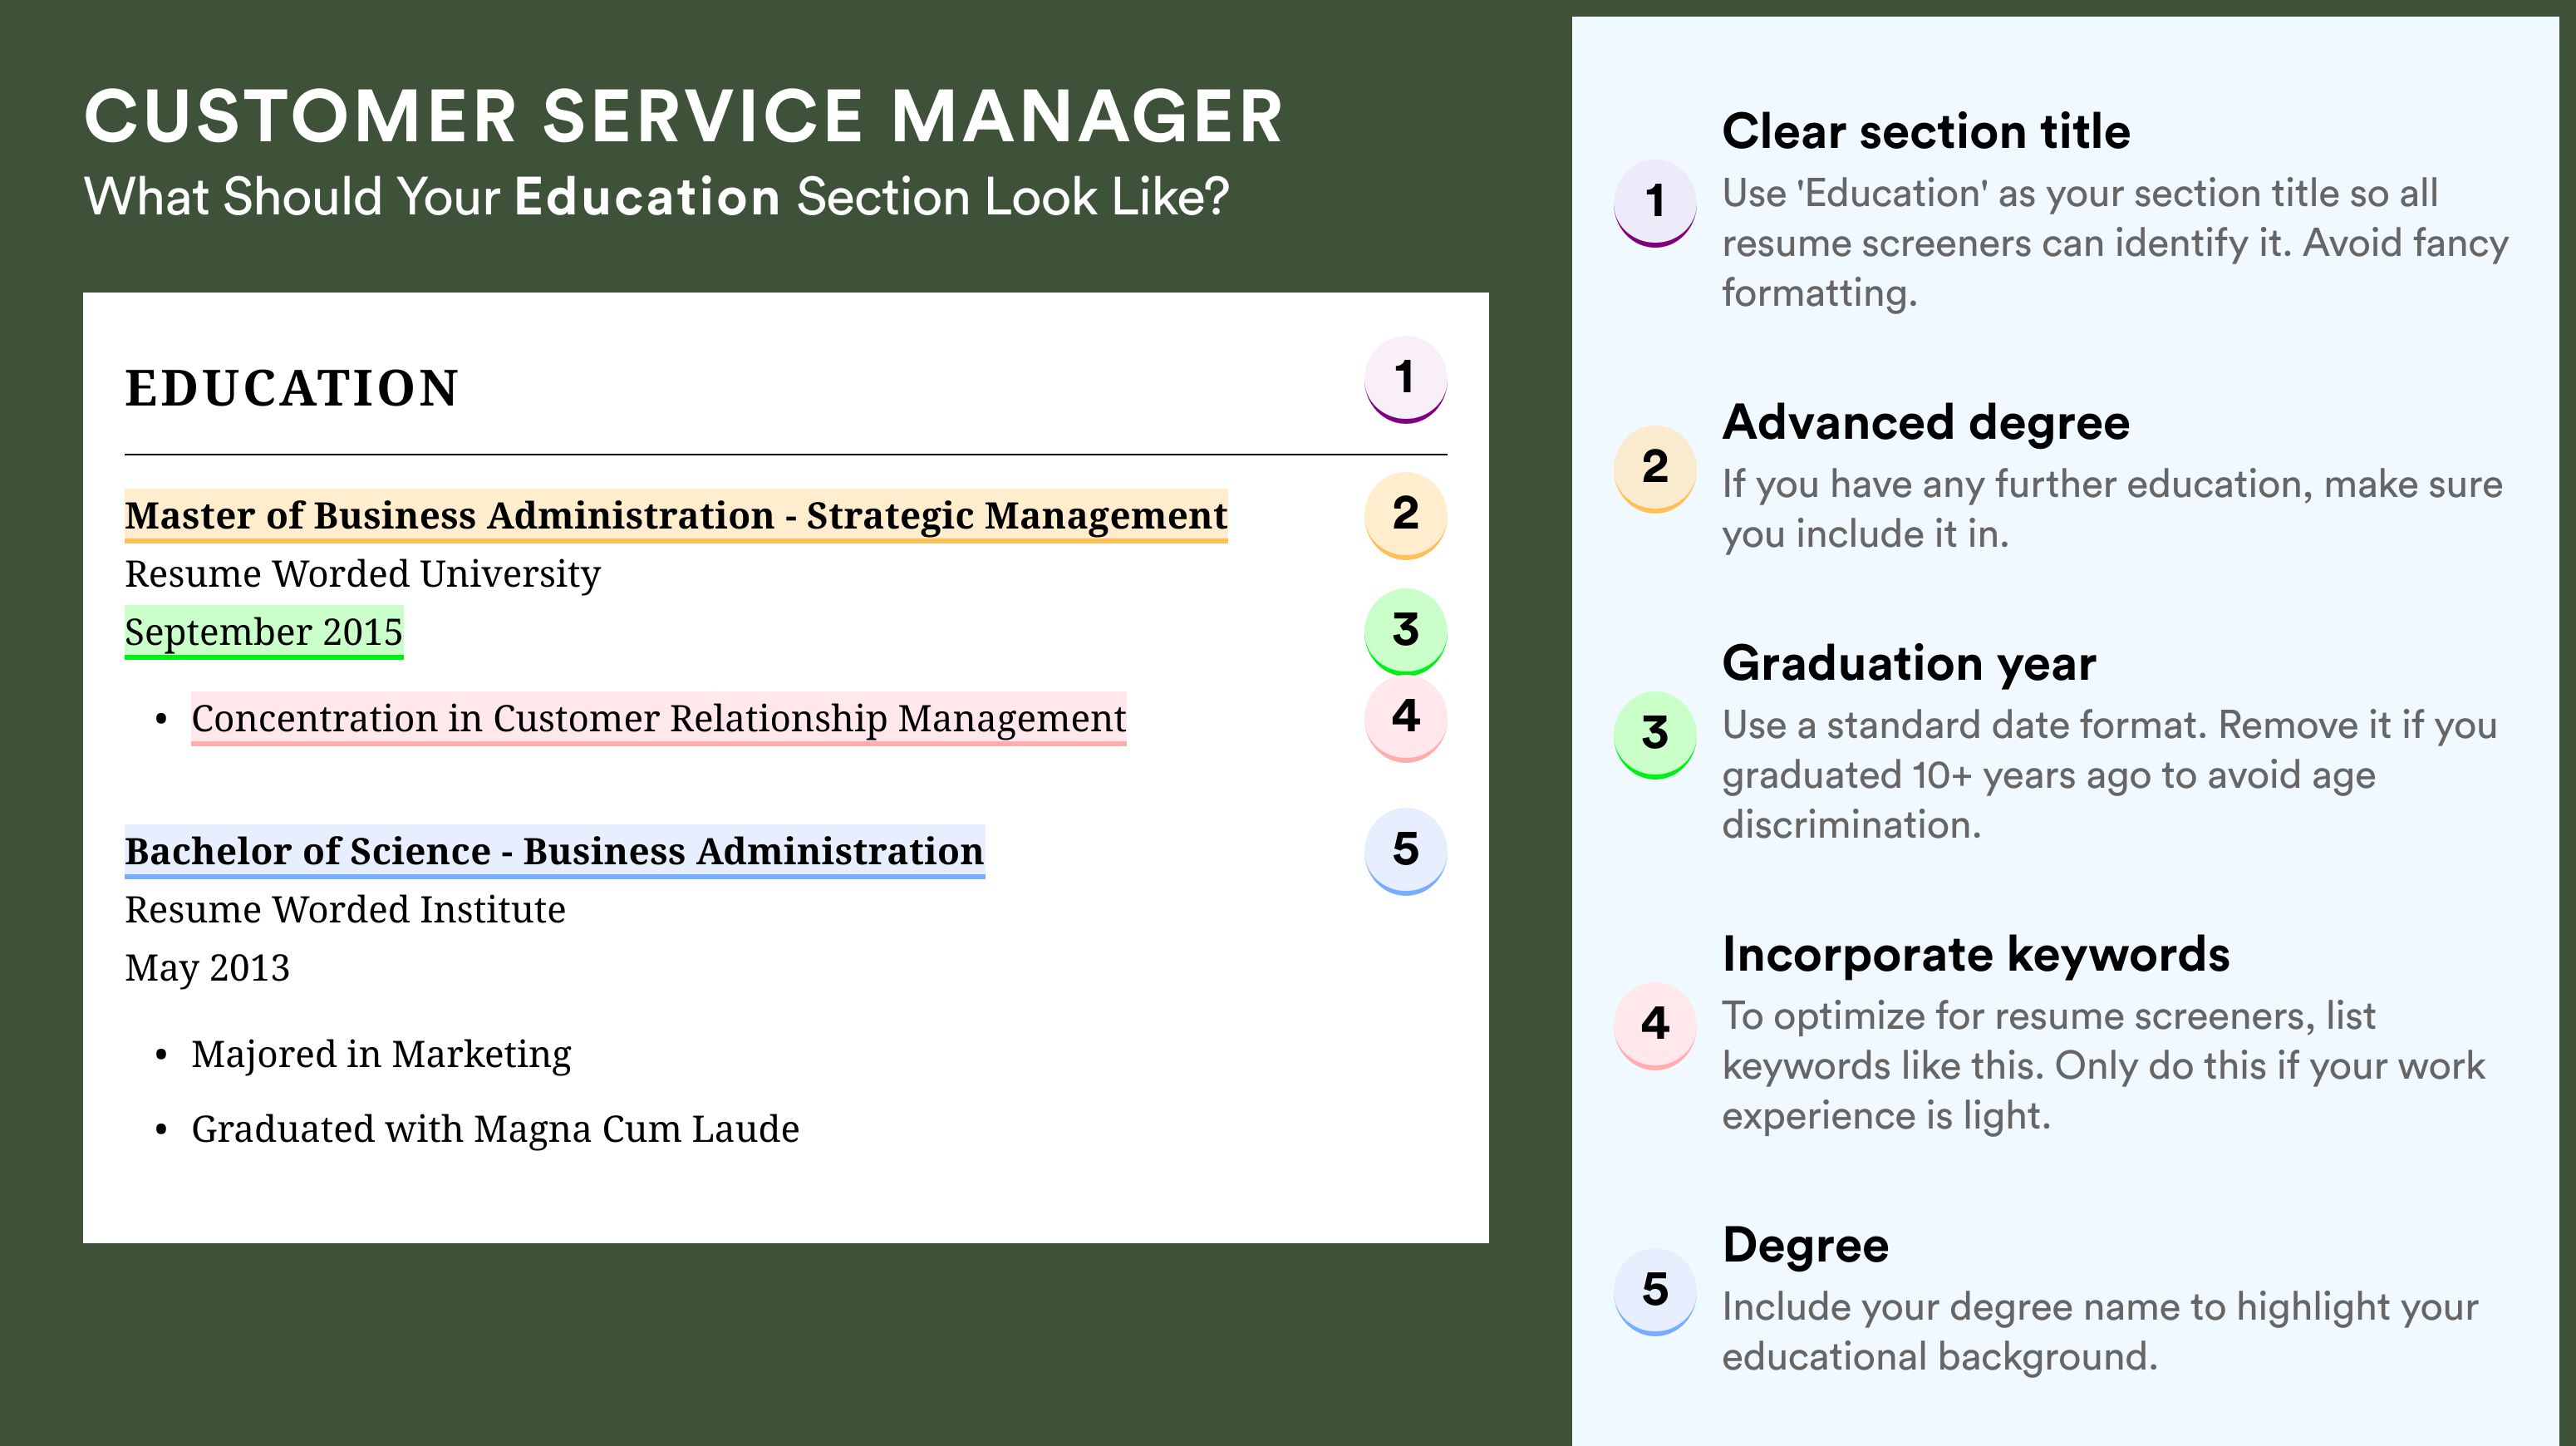 How To Write An Education Section - Customer Service Manager Roles